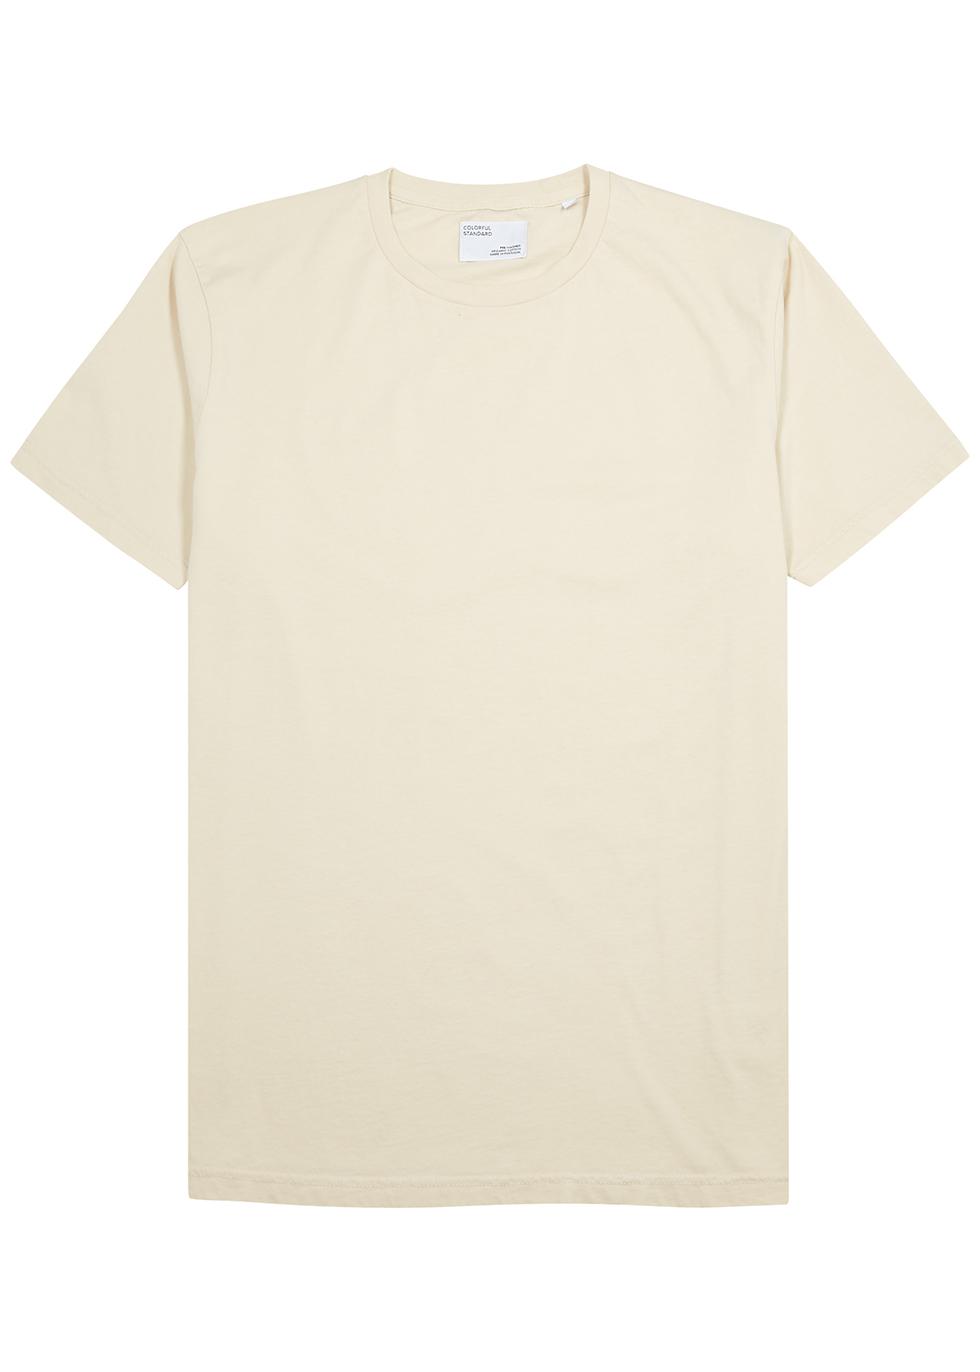 Off-white cotton T-shirt by COLORFUL STANDARD